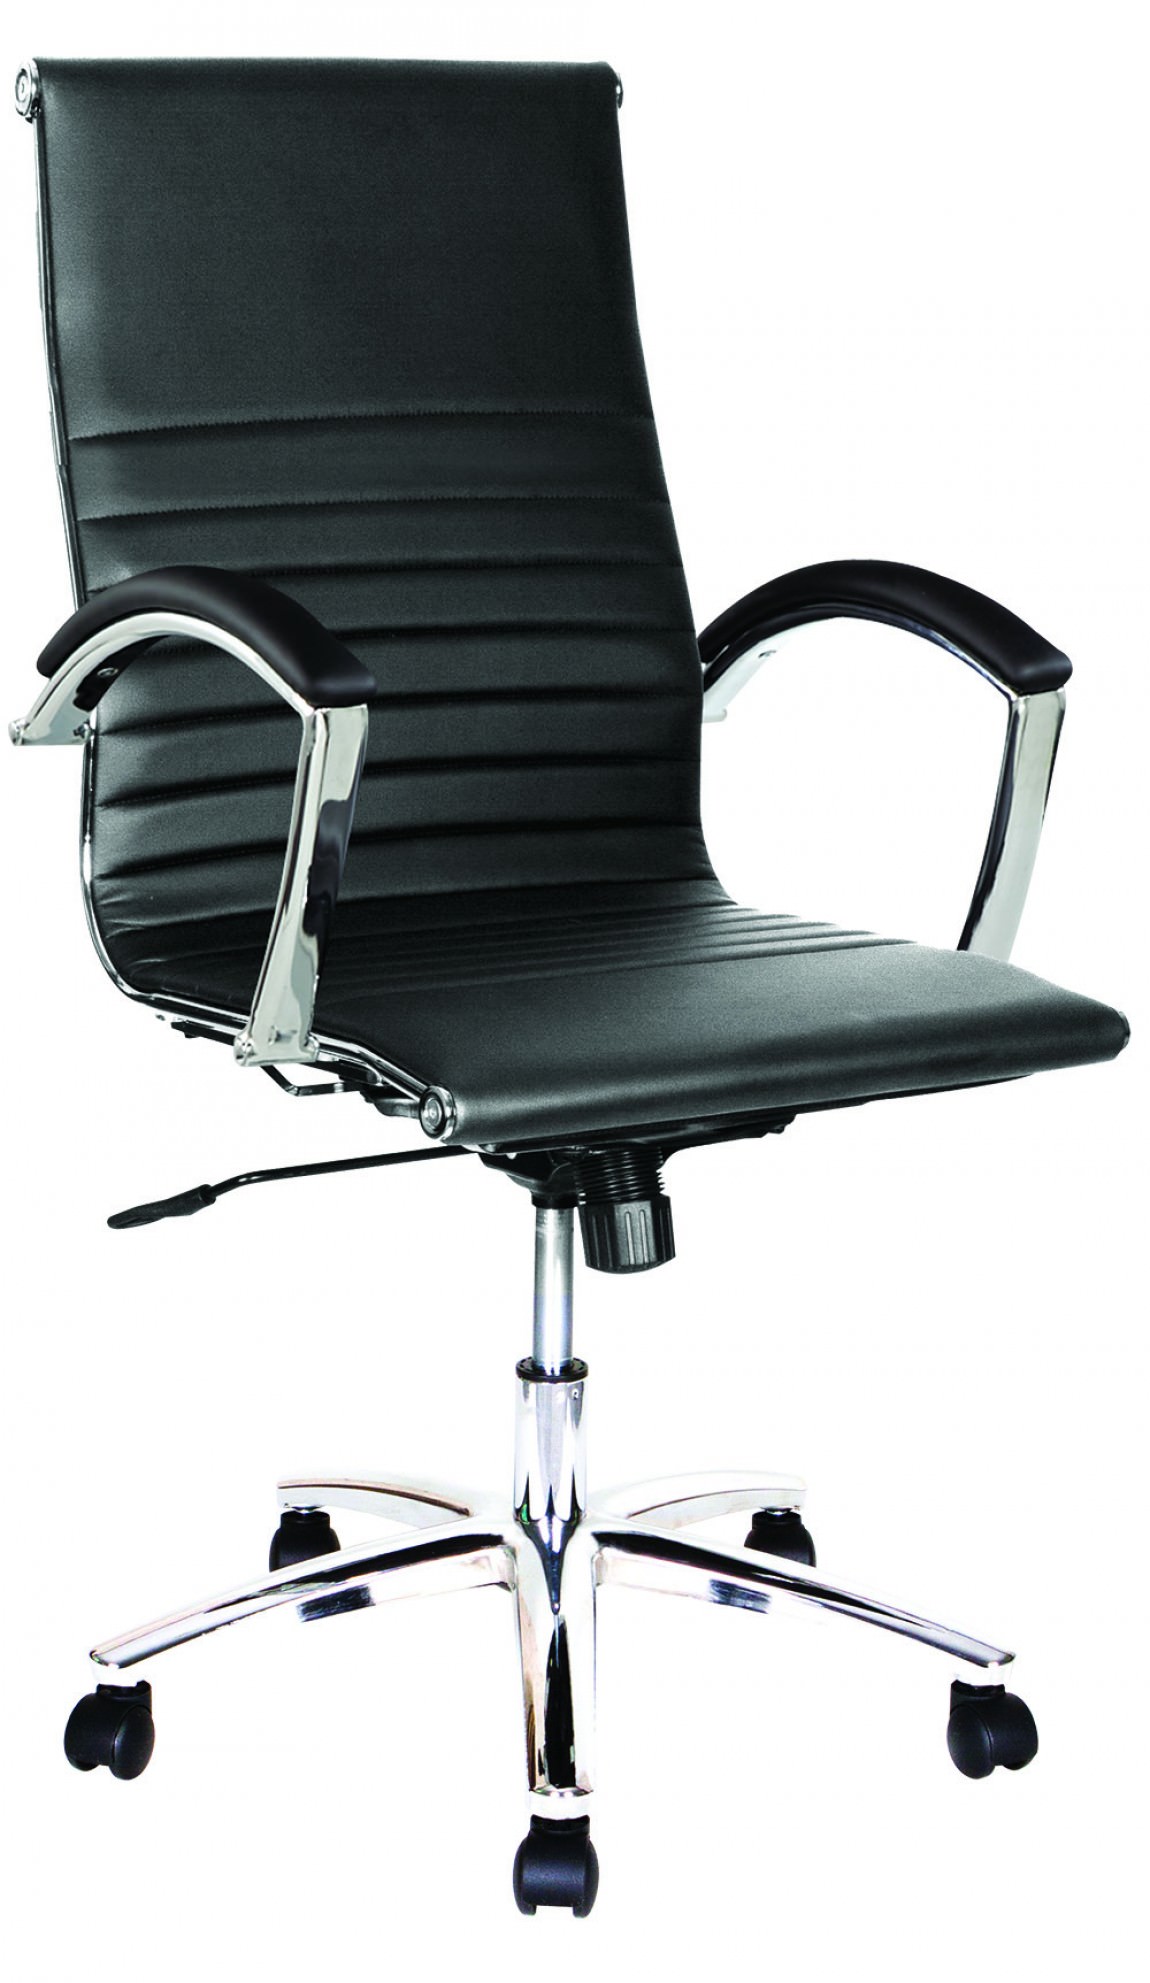 Modern Black High Back Conference Room Chair with Arms : Jazz : Harmony